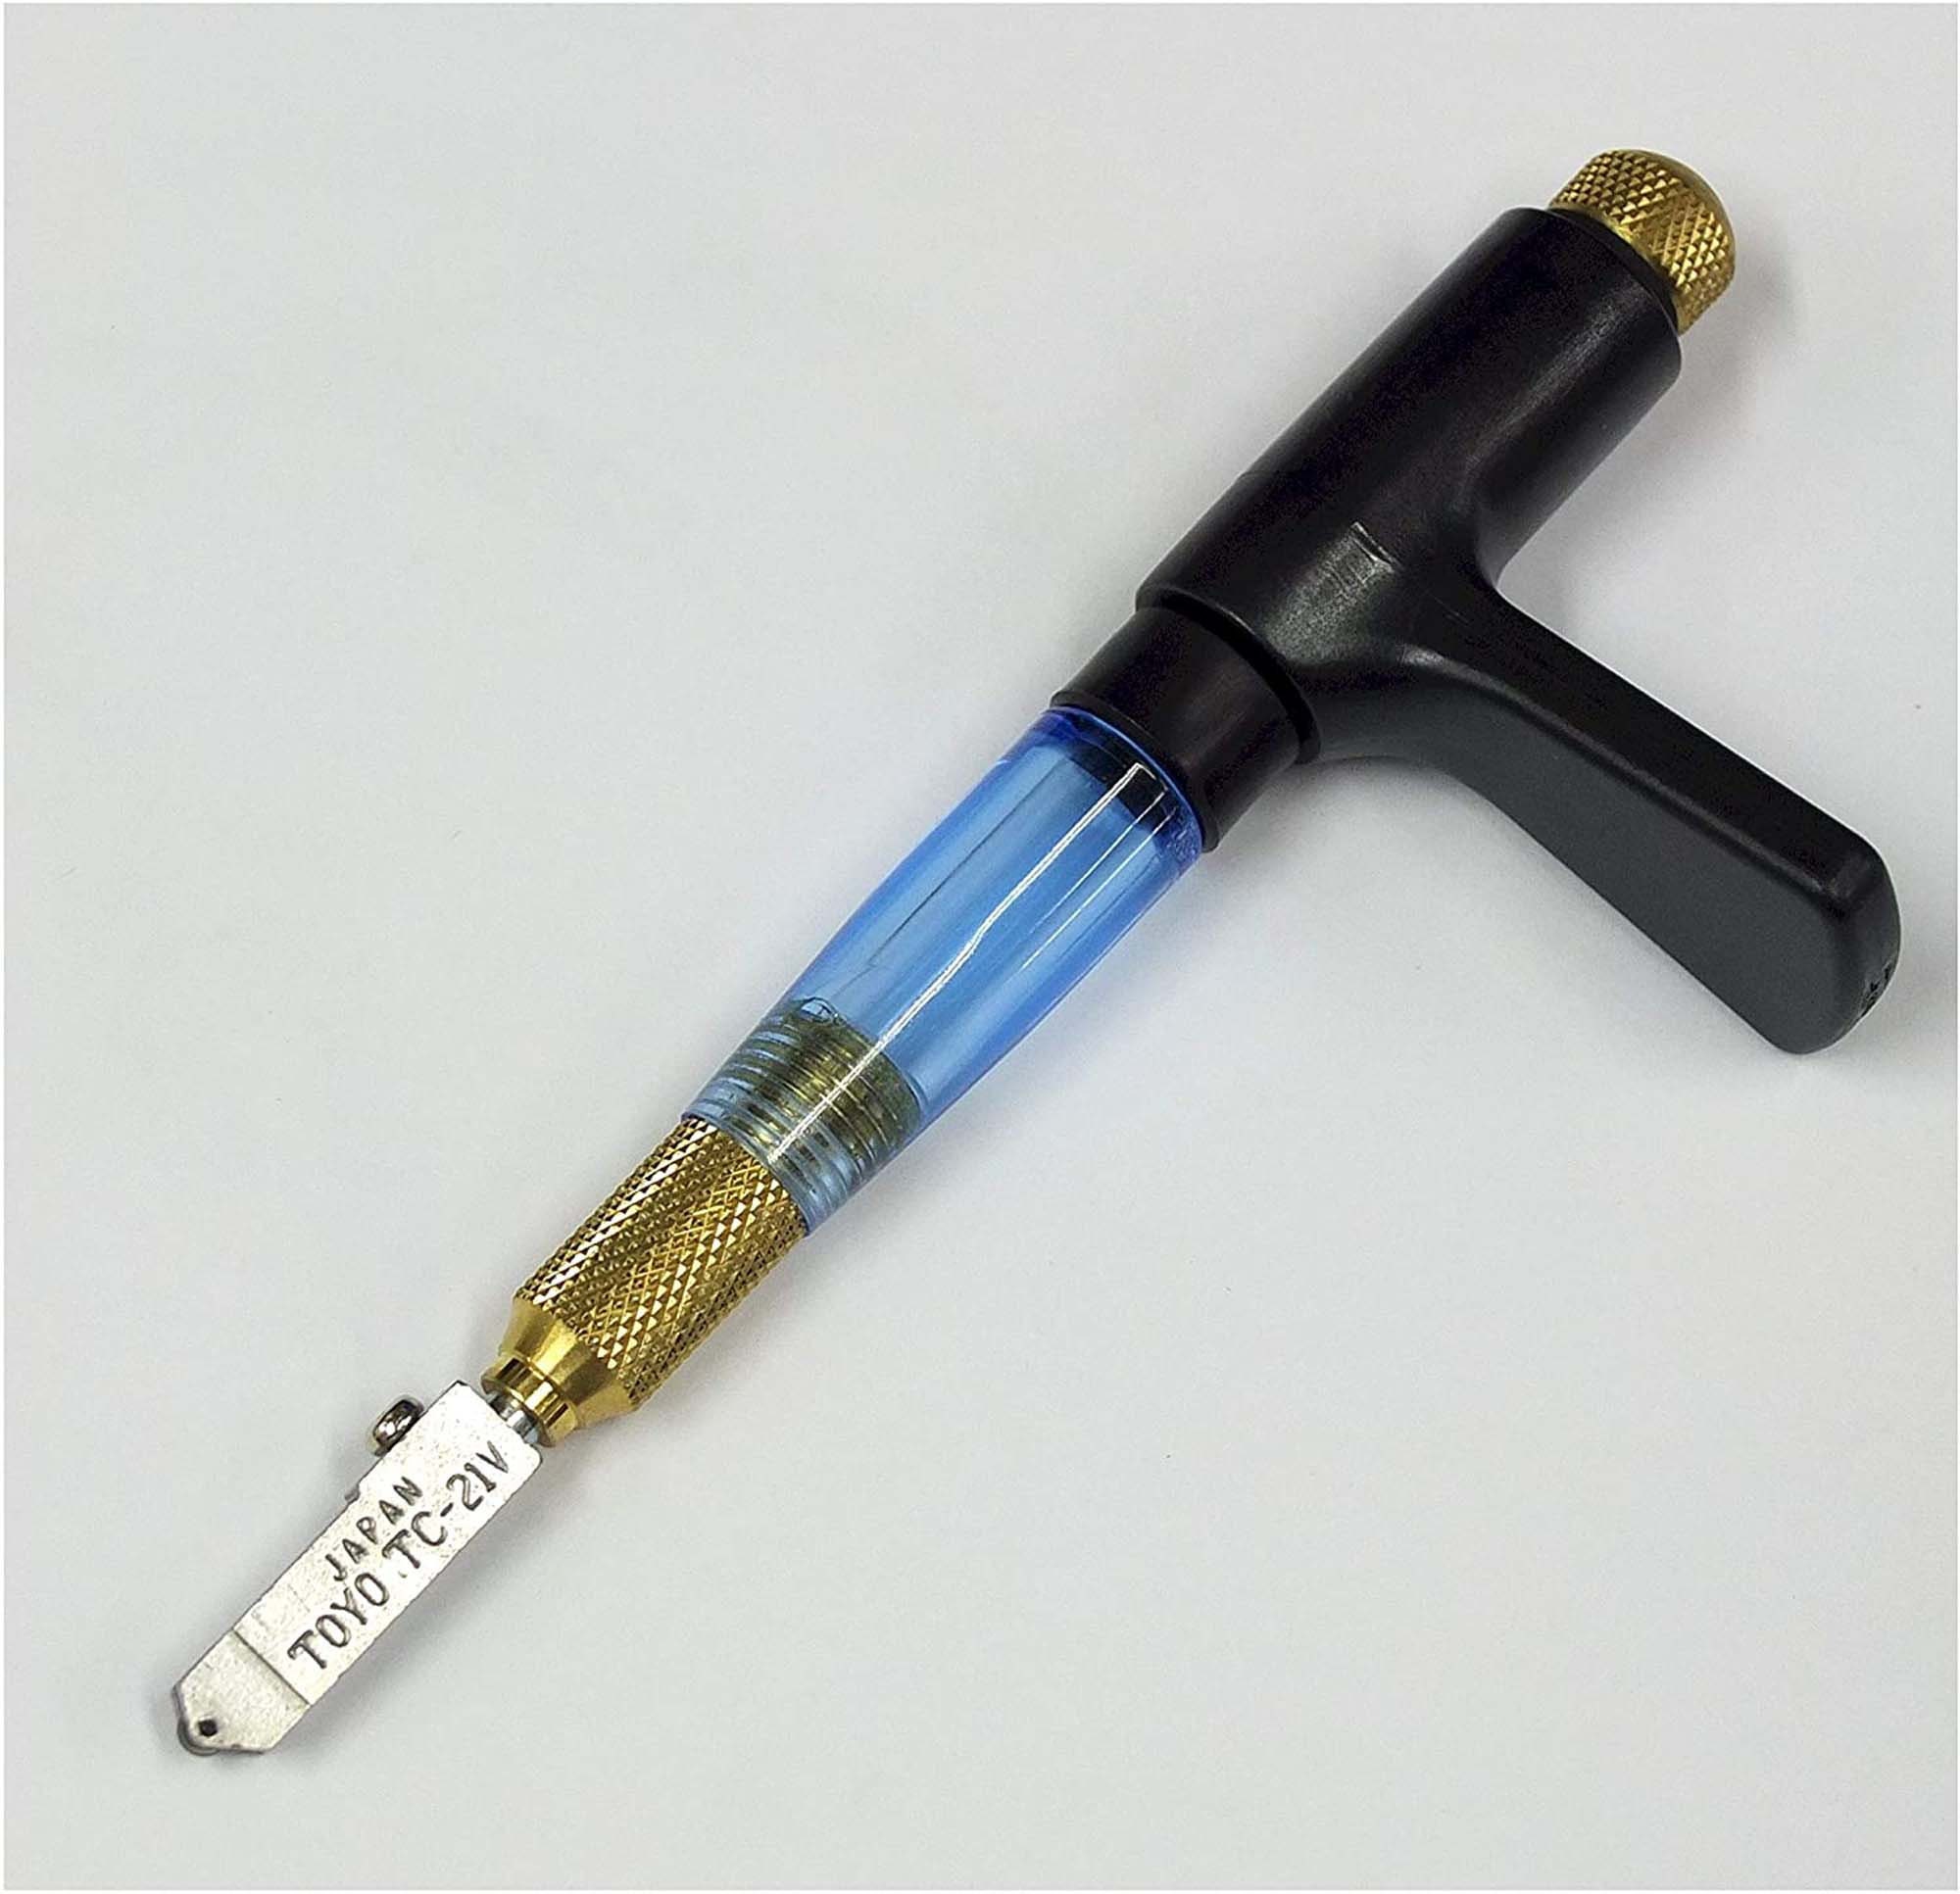 Toyo Comfort Grip SuperCutter Oil-Fed Glass Cutter for Stained Glass